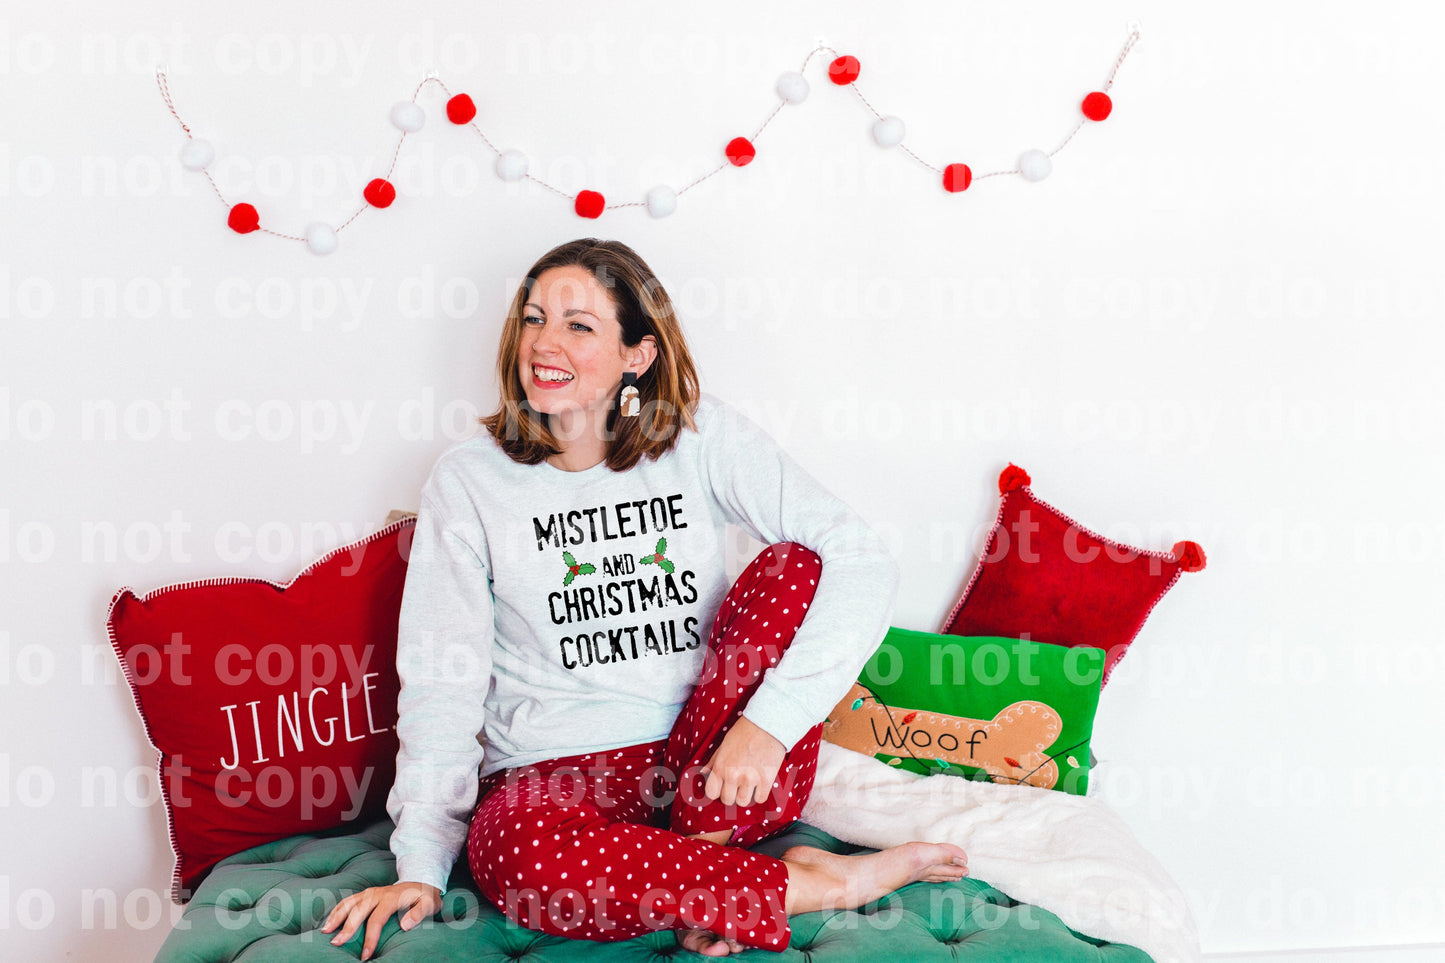 Mistletoe And Christmas Cocktails Full Color/One Color Dream Print or Sublimation Print